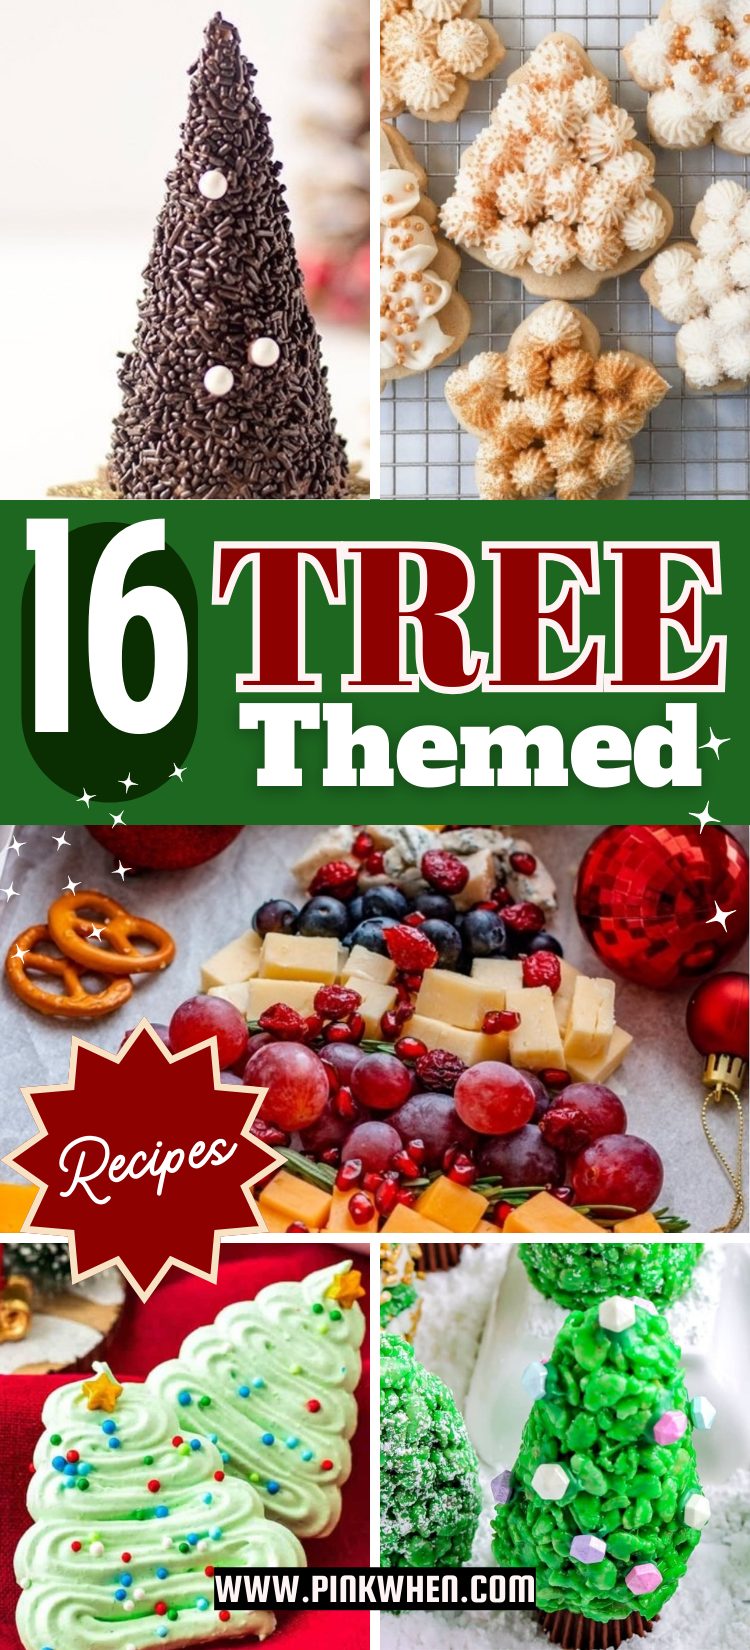 24 Christmas Tree Recipes to Add Magic to the Holidays